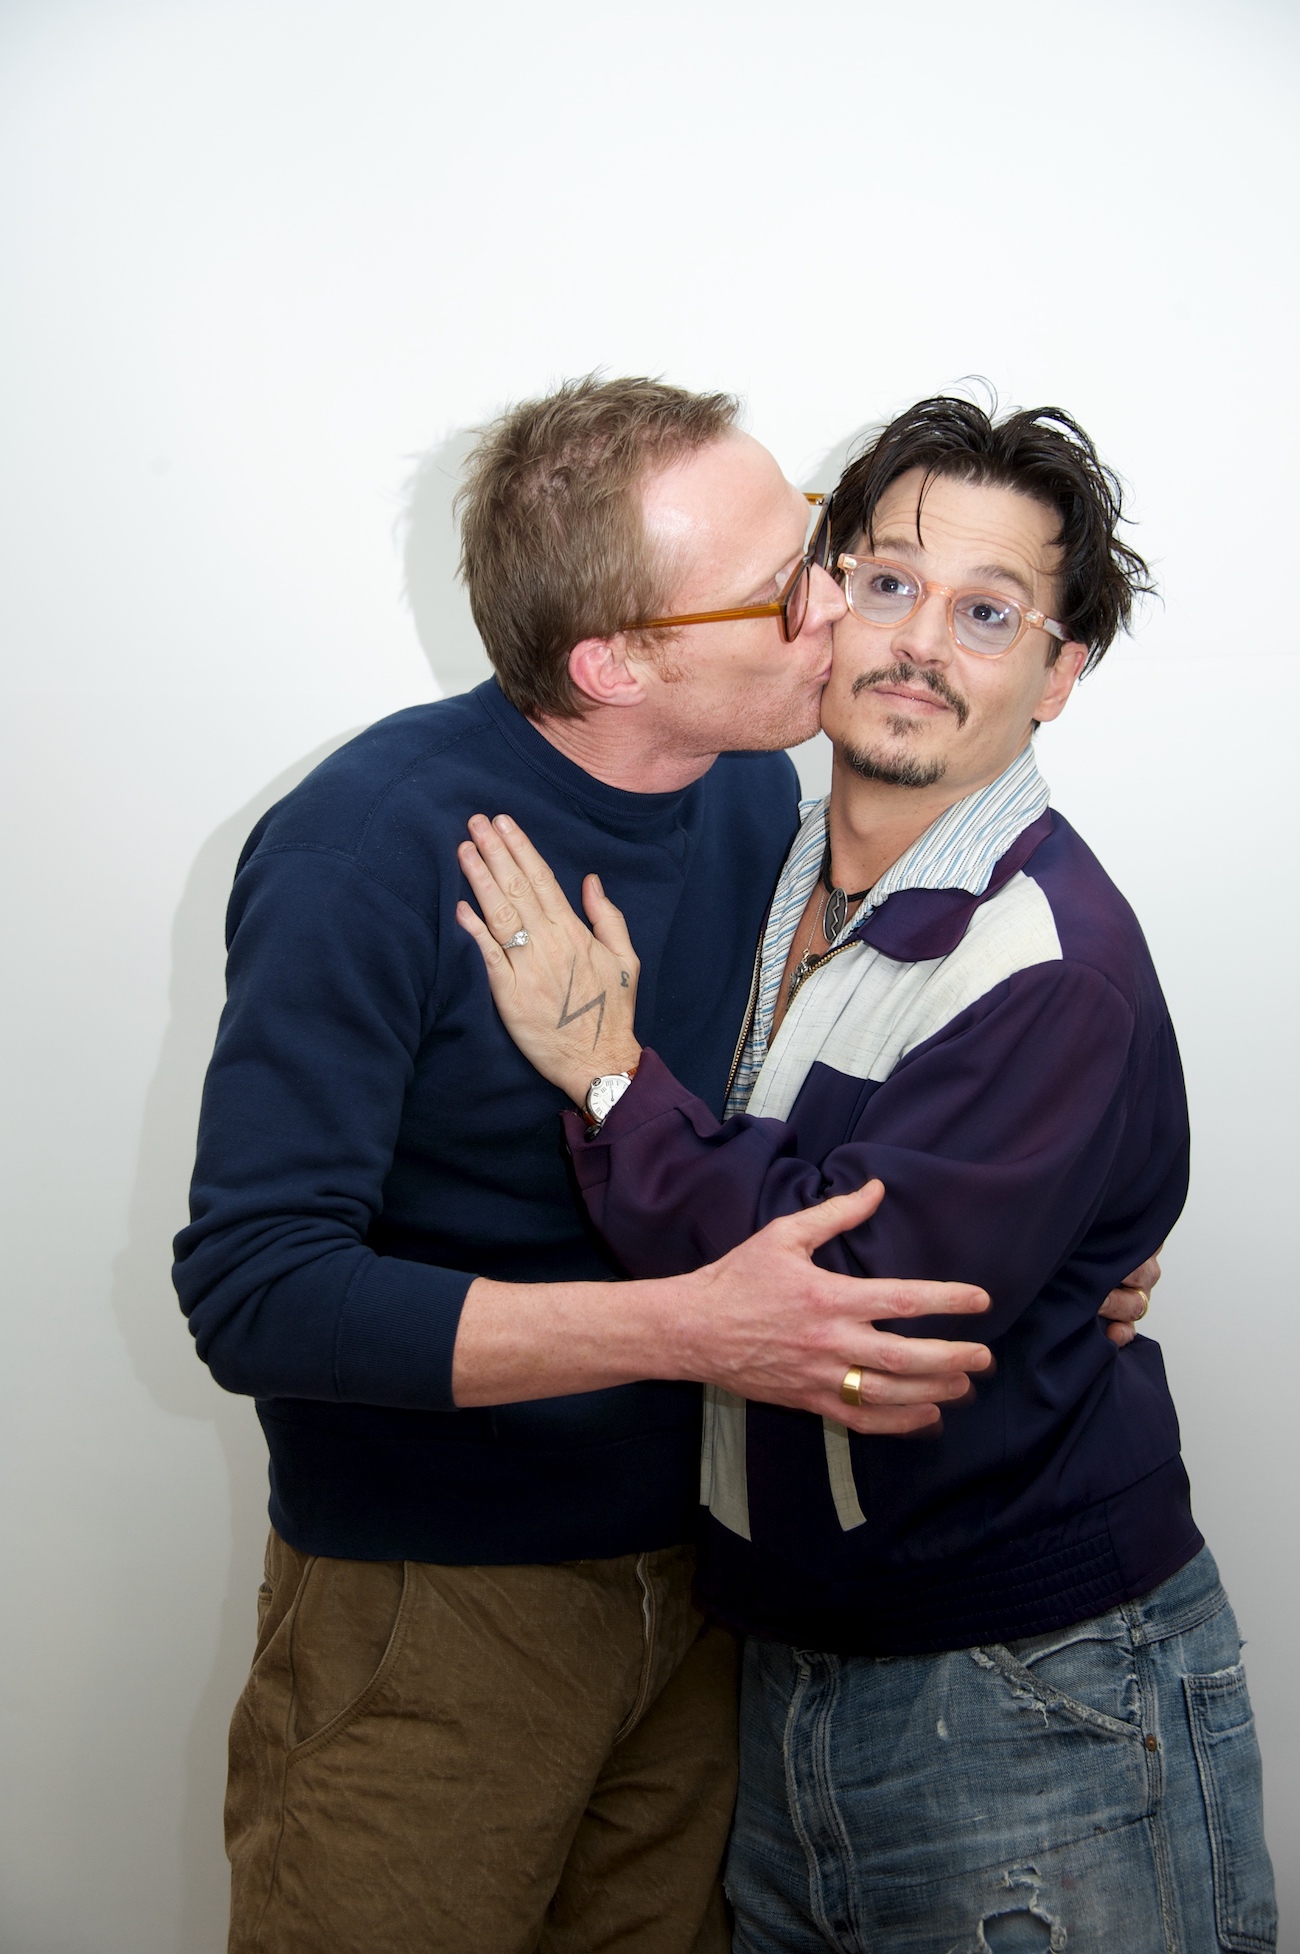 johnny Depp On Mcu Star Paul Bettany In Mortdecai The Only Person Who Could Play Jock